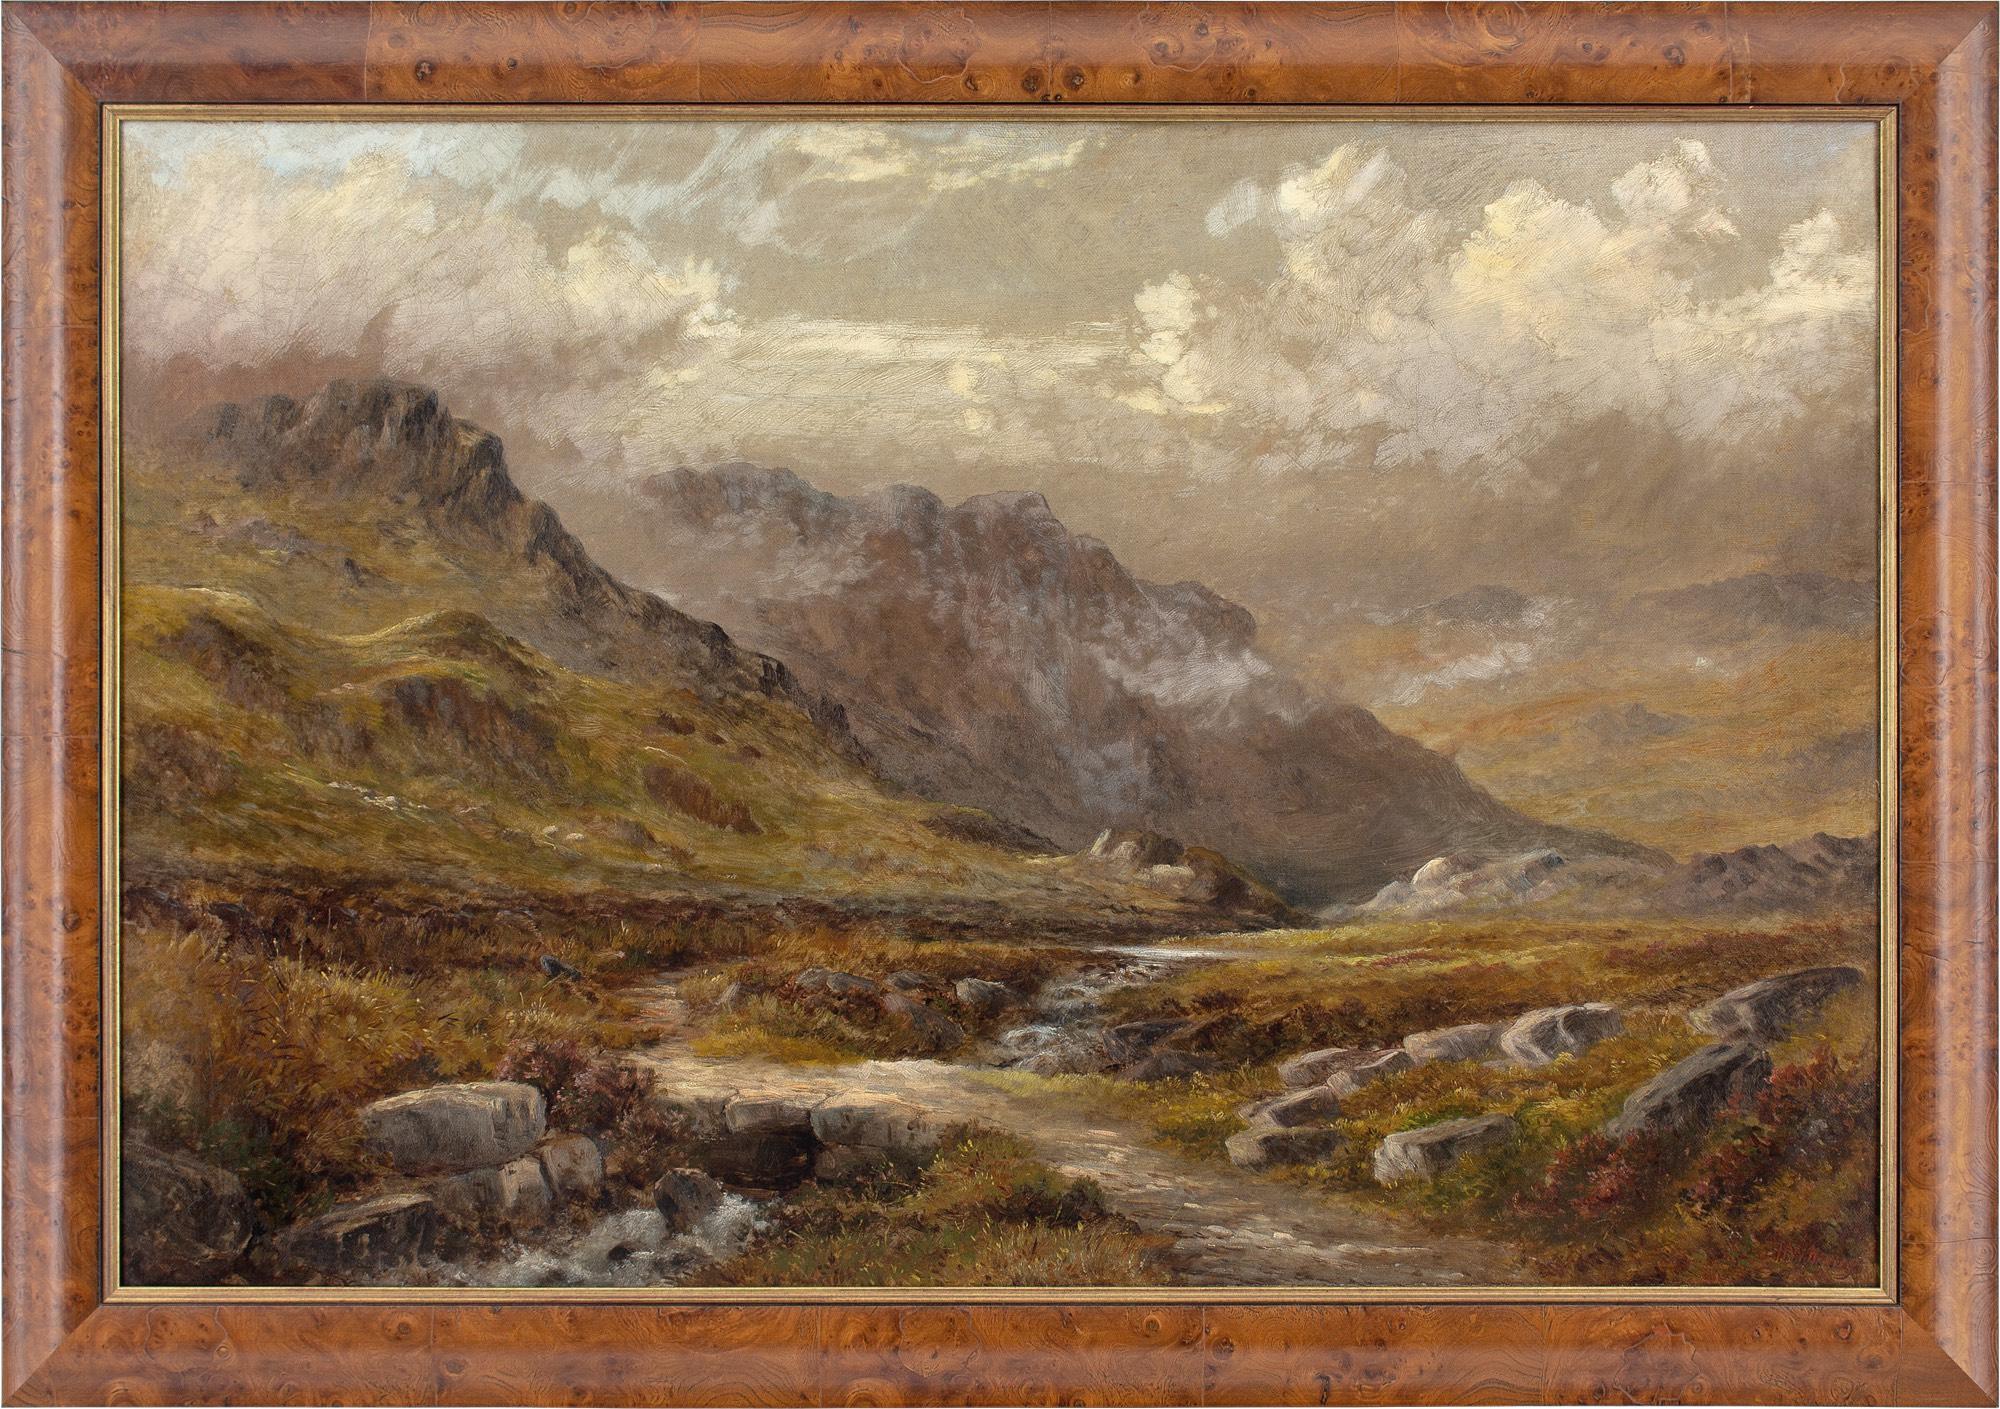 This late 19th-century oil painting by British artist Henry W Henley (fl.1871-1895) depicts an upland landscape with a winding stream.

Henry W Henley was a notable landscape painter known predominantly for his works in oil. His often dramatic